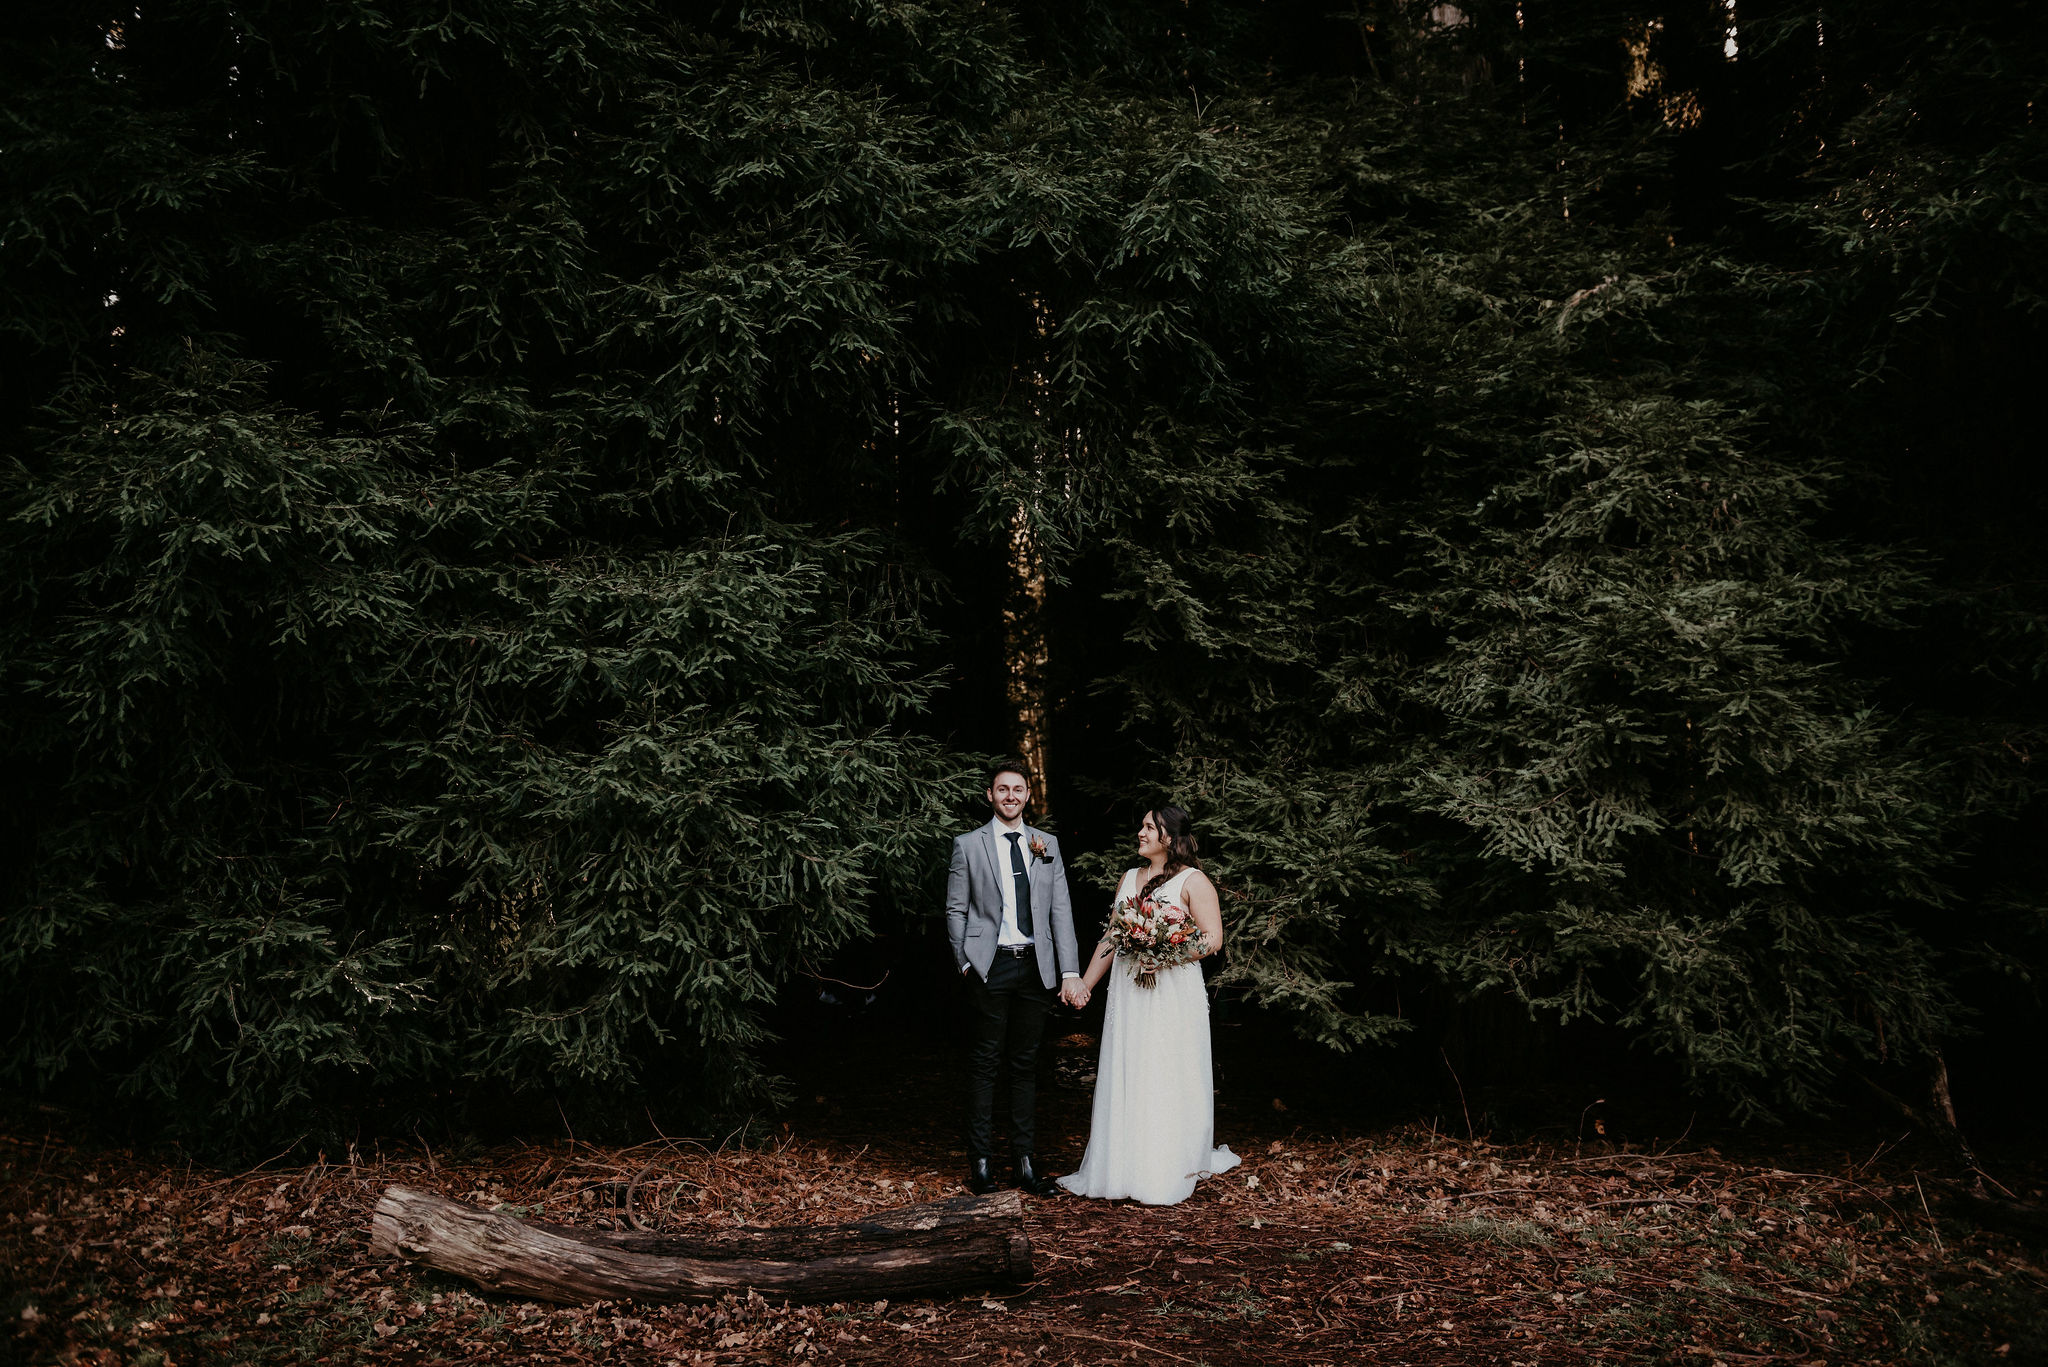 Lets-Elope-Melbourne-Celebrant-Photographer-Elopement-Package-Victoria-Sarah-Matler-Photography-Videography-Video-Warburton-Redwood-Forest-weddings-intimate-15